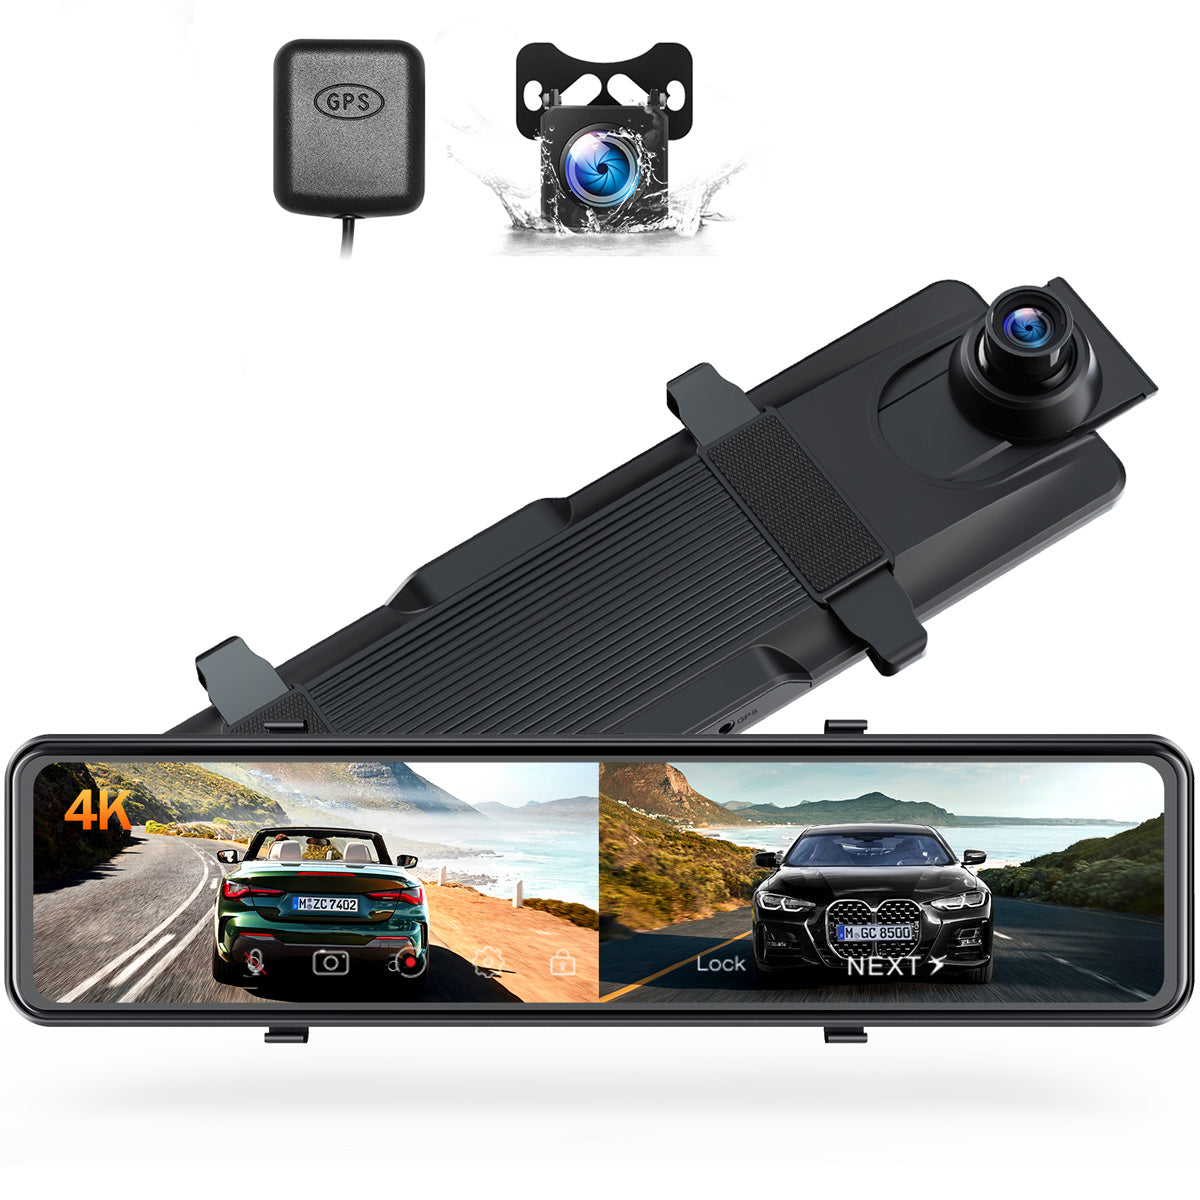 Campark CE80B 4K 12" Full Touch Screen Voice Control Mirror Dash Camera (Out Of Stock In The UK)